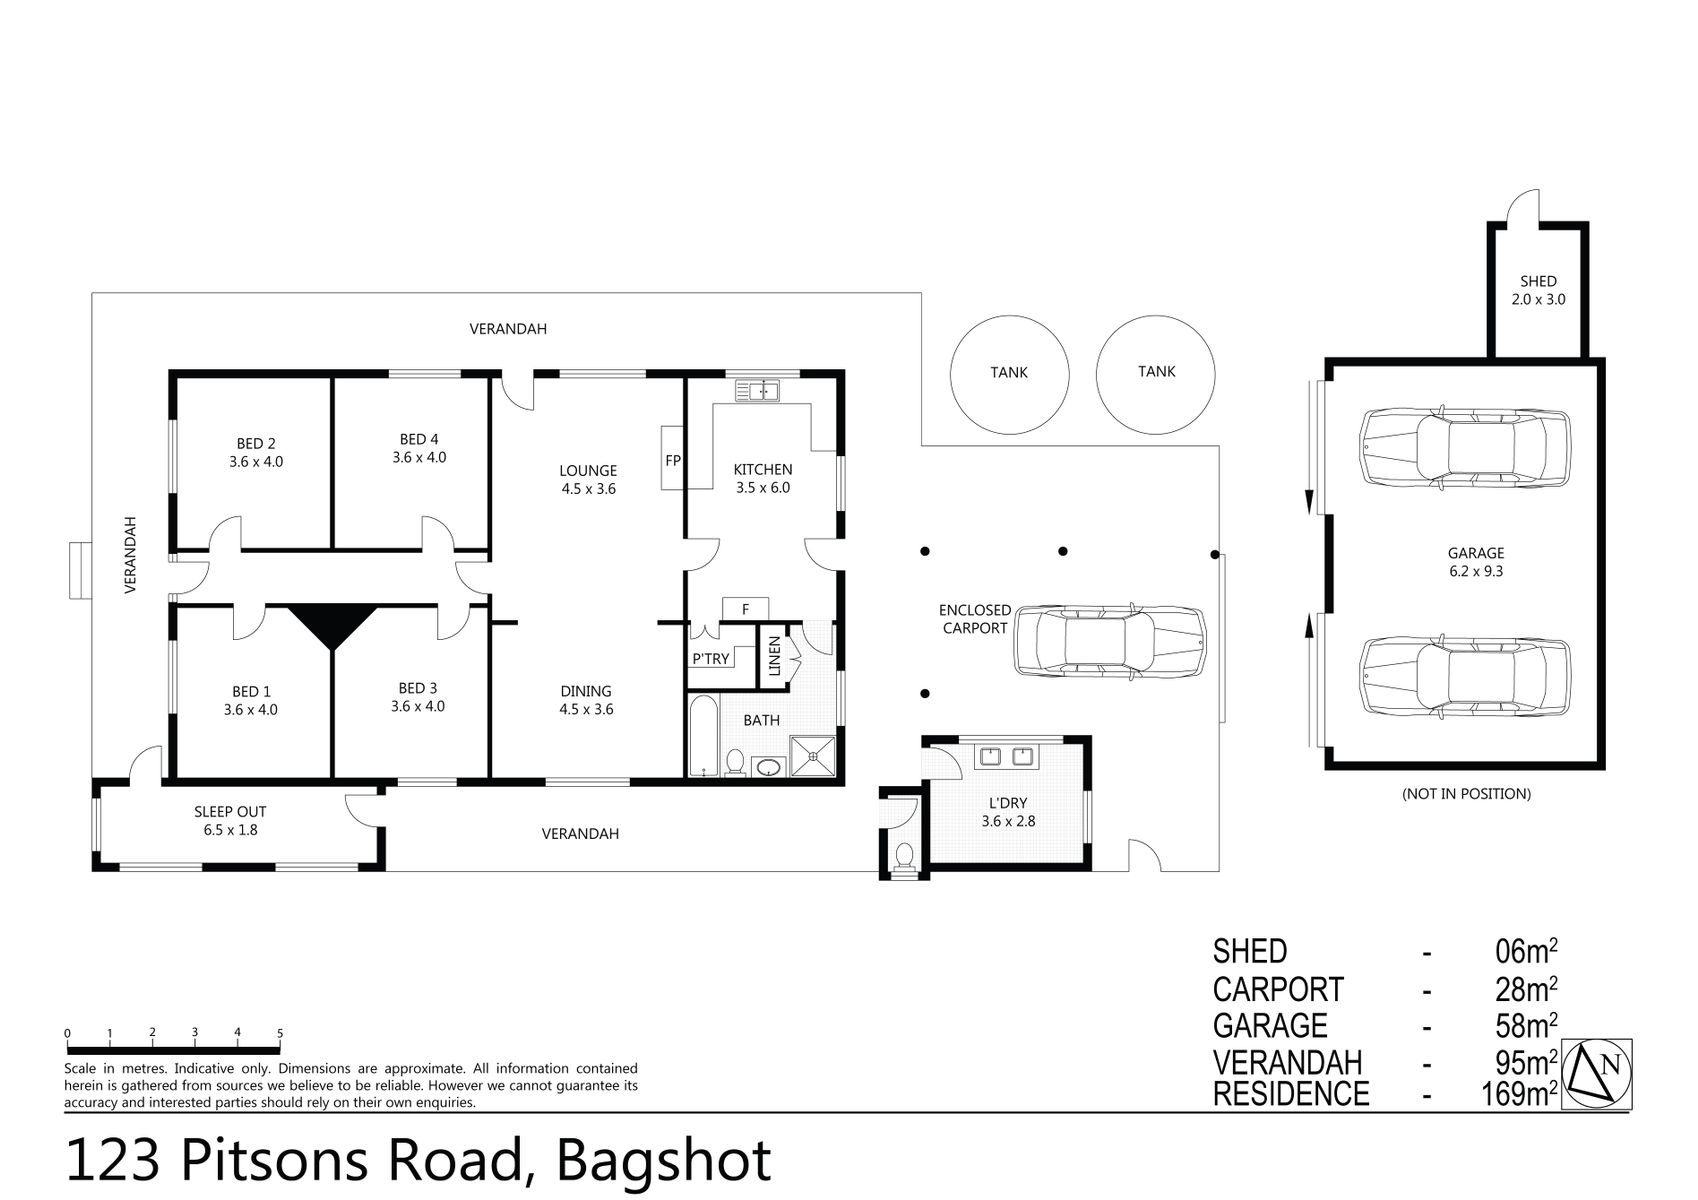 APPROVED FLOORPLAN 123 Pitsons Road, Bagshot (23 AUGUST 2018) 169 sqm (2)